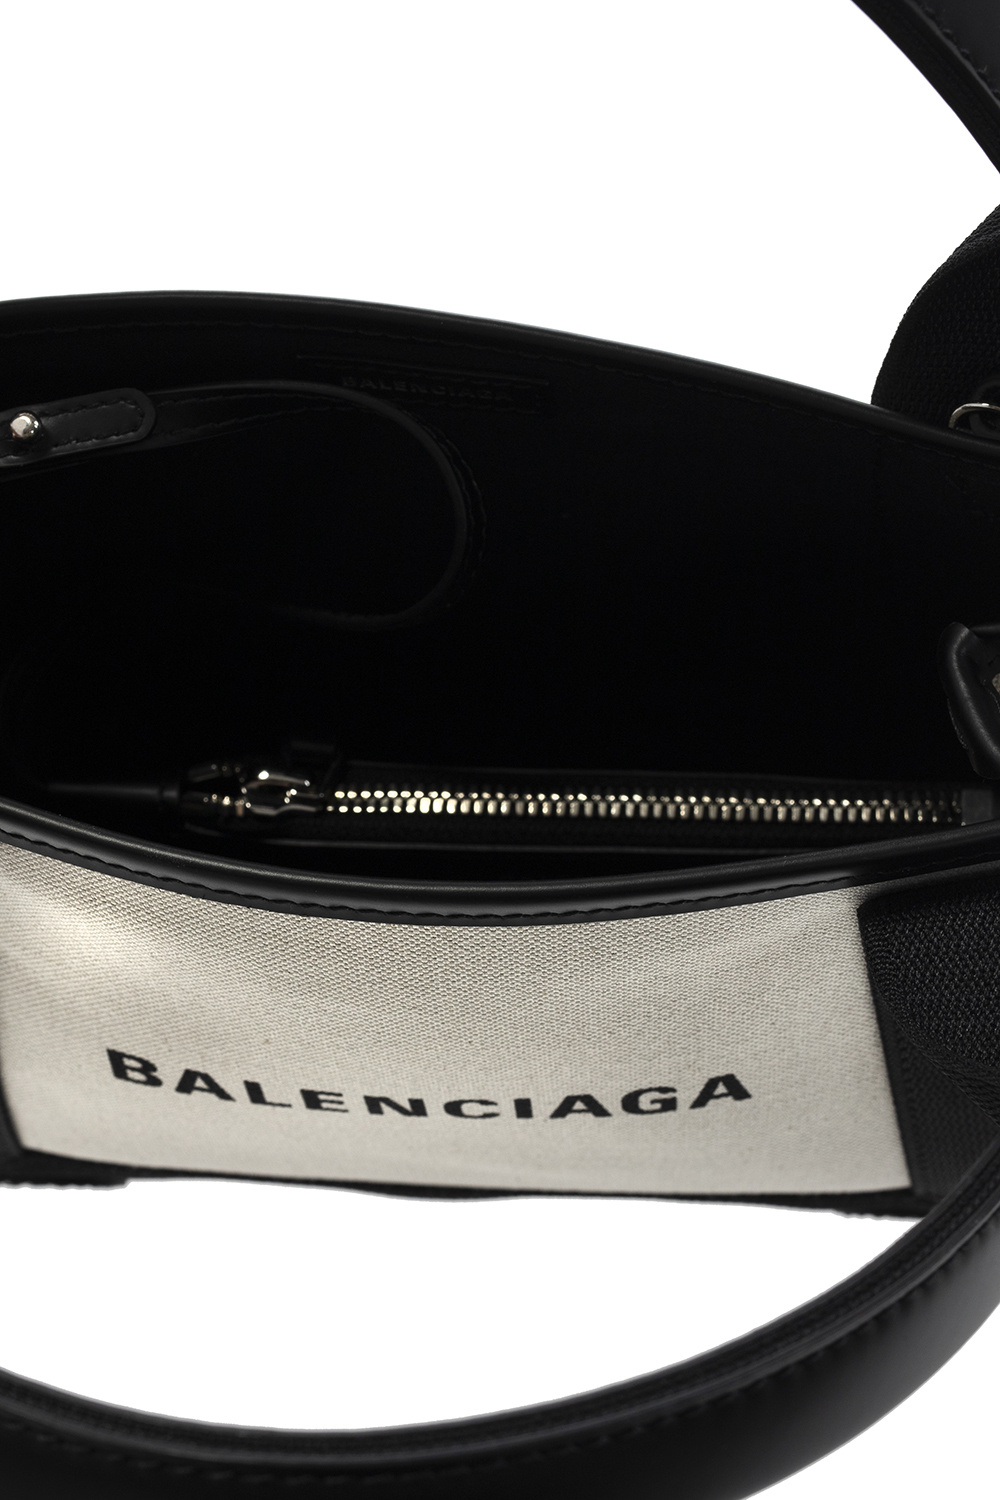 BALENCIAGA NAVY Cabas XS 2way Hand Tote Bag Pouch Canvas Leather White  18ML183